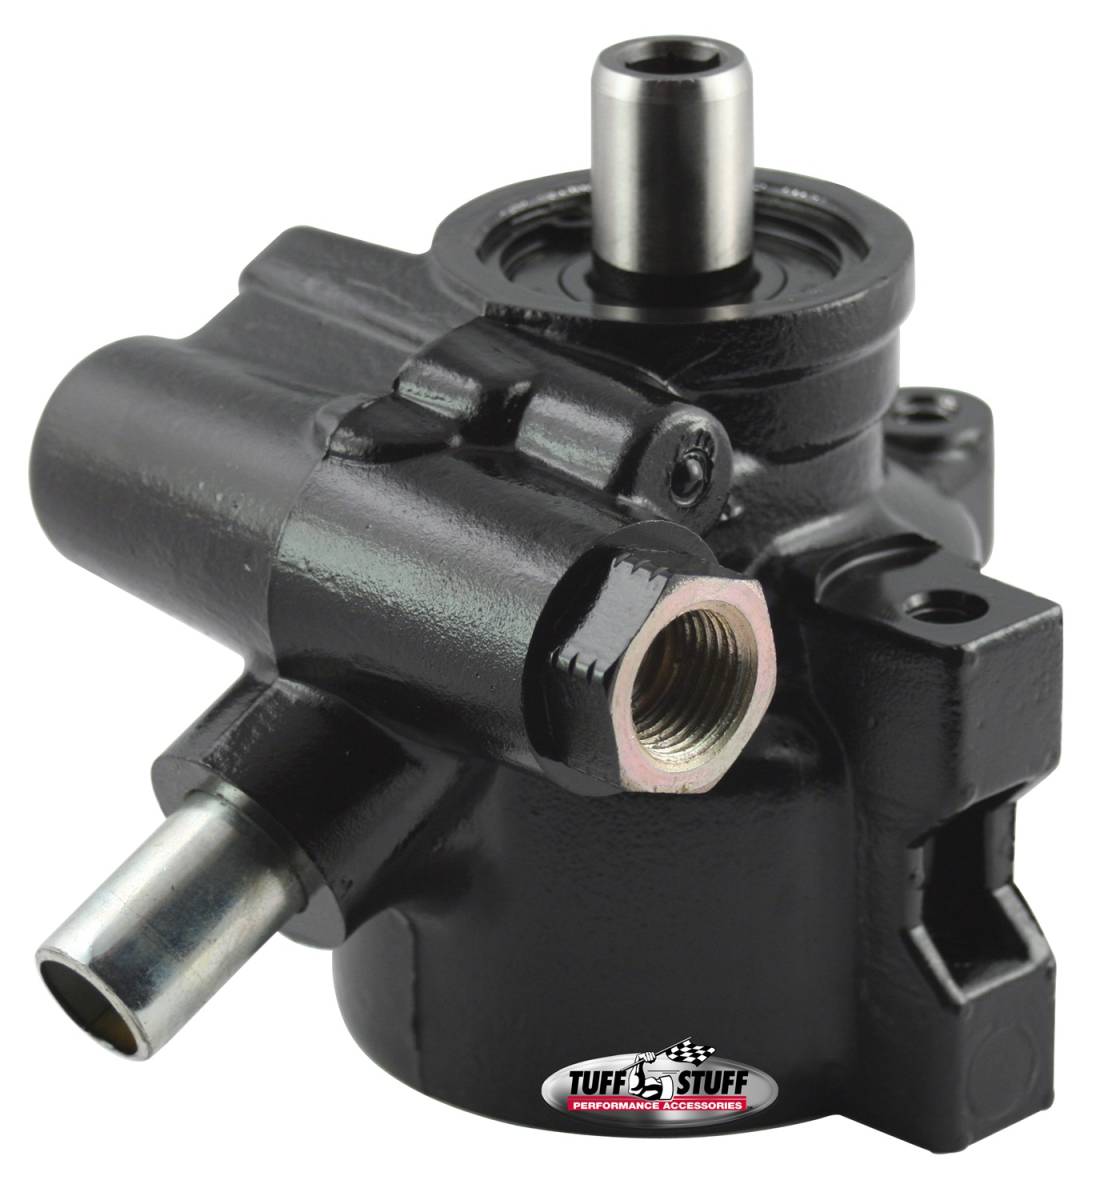 Tuff Stuff Performance - Type II Alum. Power Steering Pump M16 And 5/8 in. OD Return Tube M8x1.25 Threaded Hole Mounting Aluminum For Street Rods/Custom Vehicles w/Limited Engine Space Black 6175ALB-4